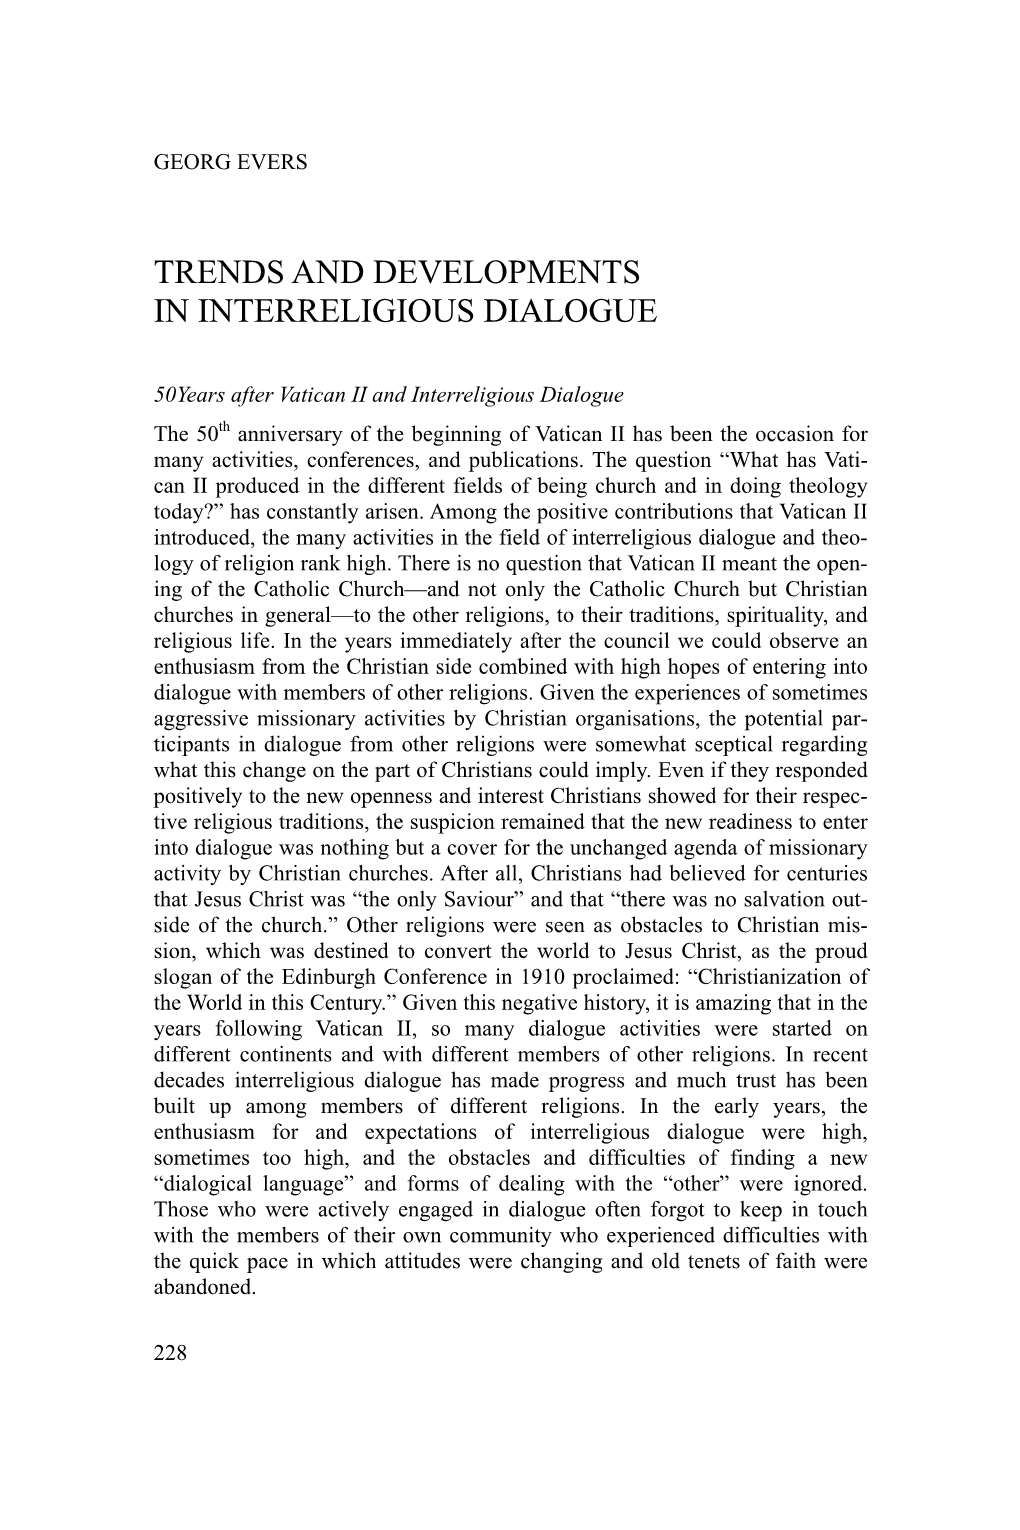 Trends and Developments in Interreligious Dialogue